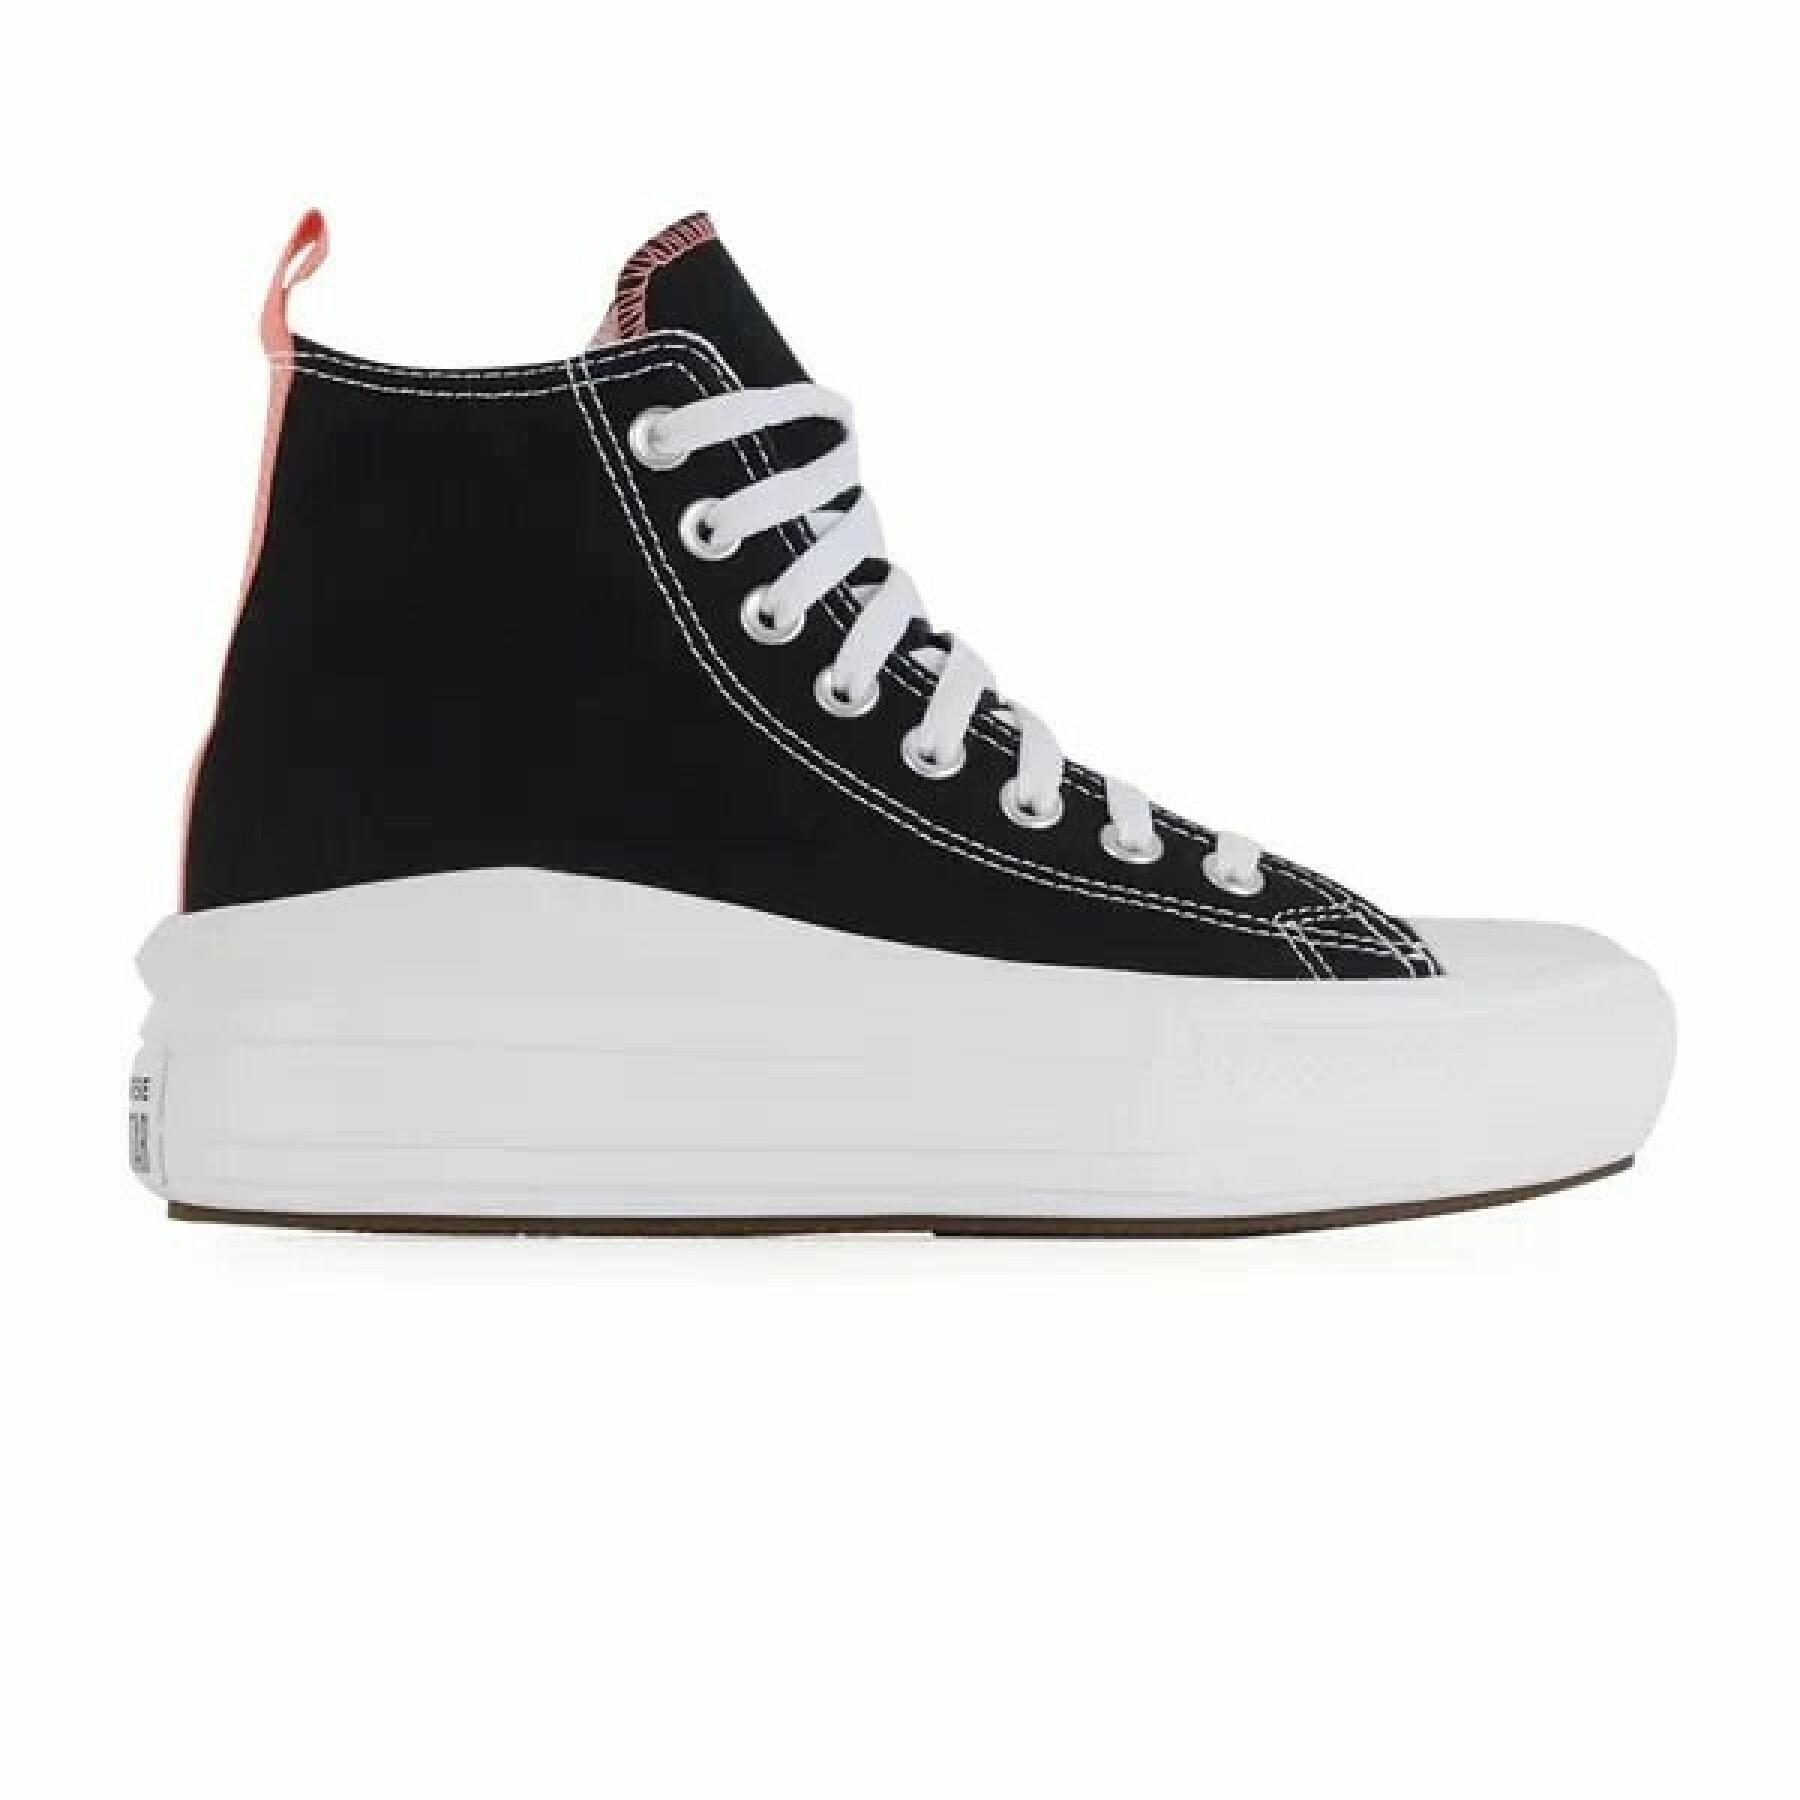 Children's high top sneakers Converse Chuck Taylor All Star Move